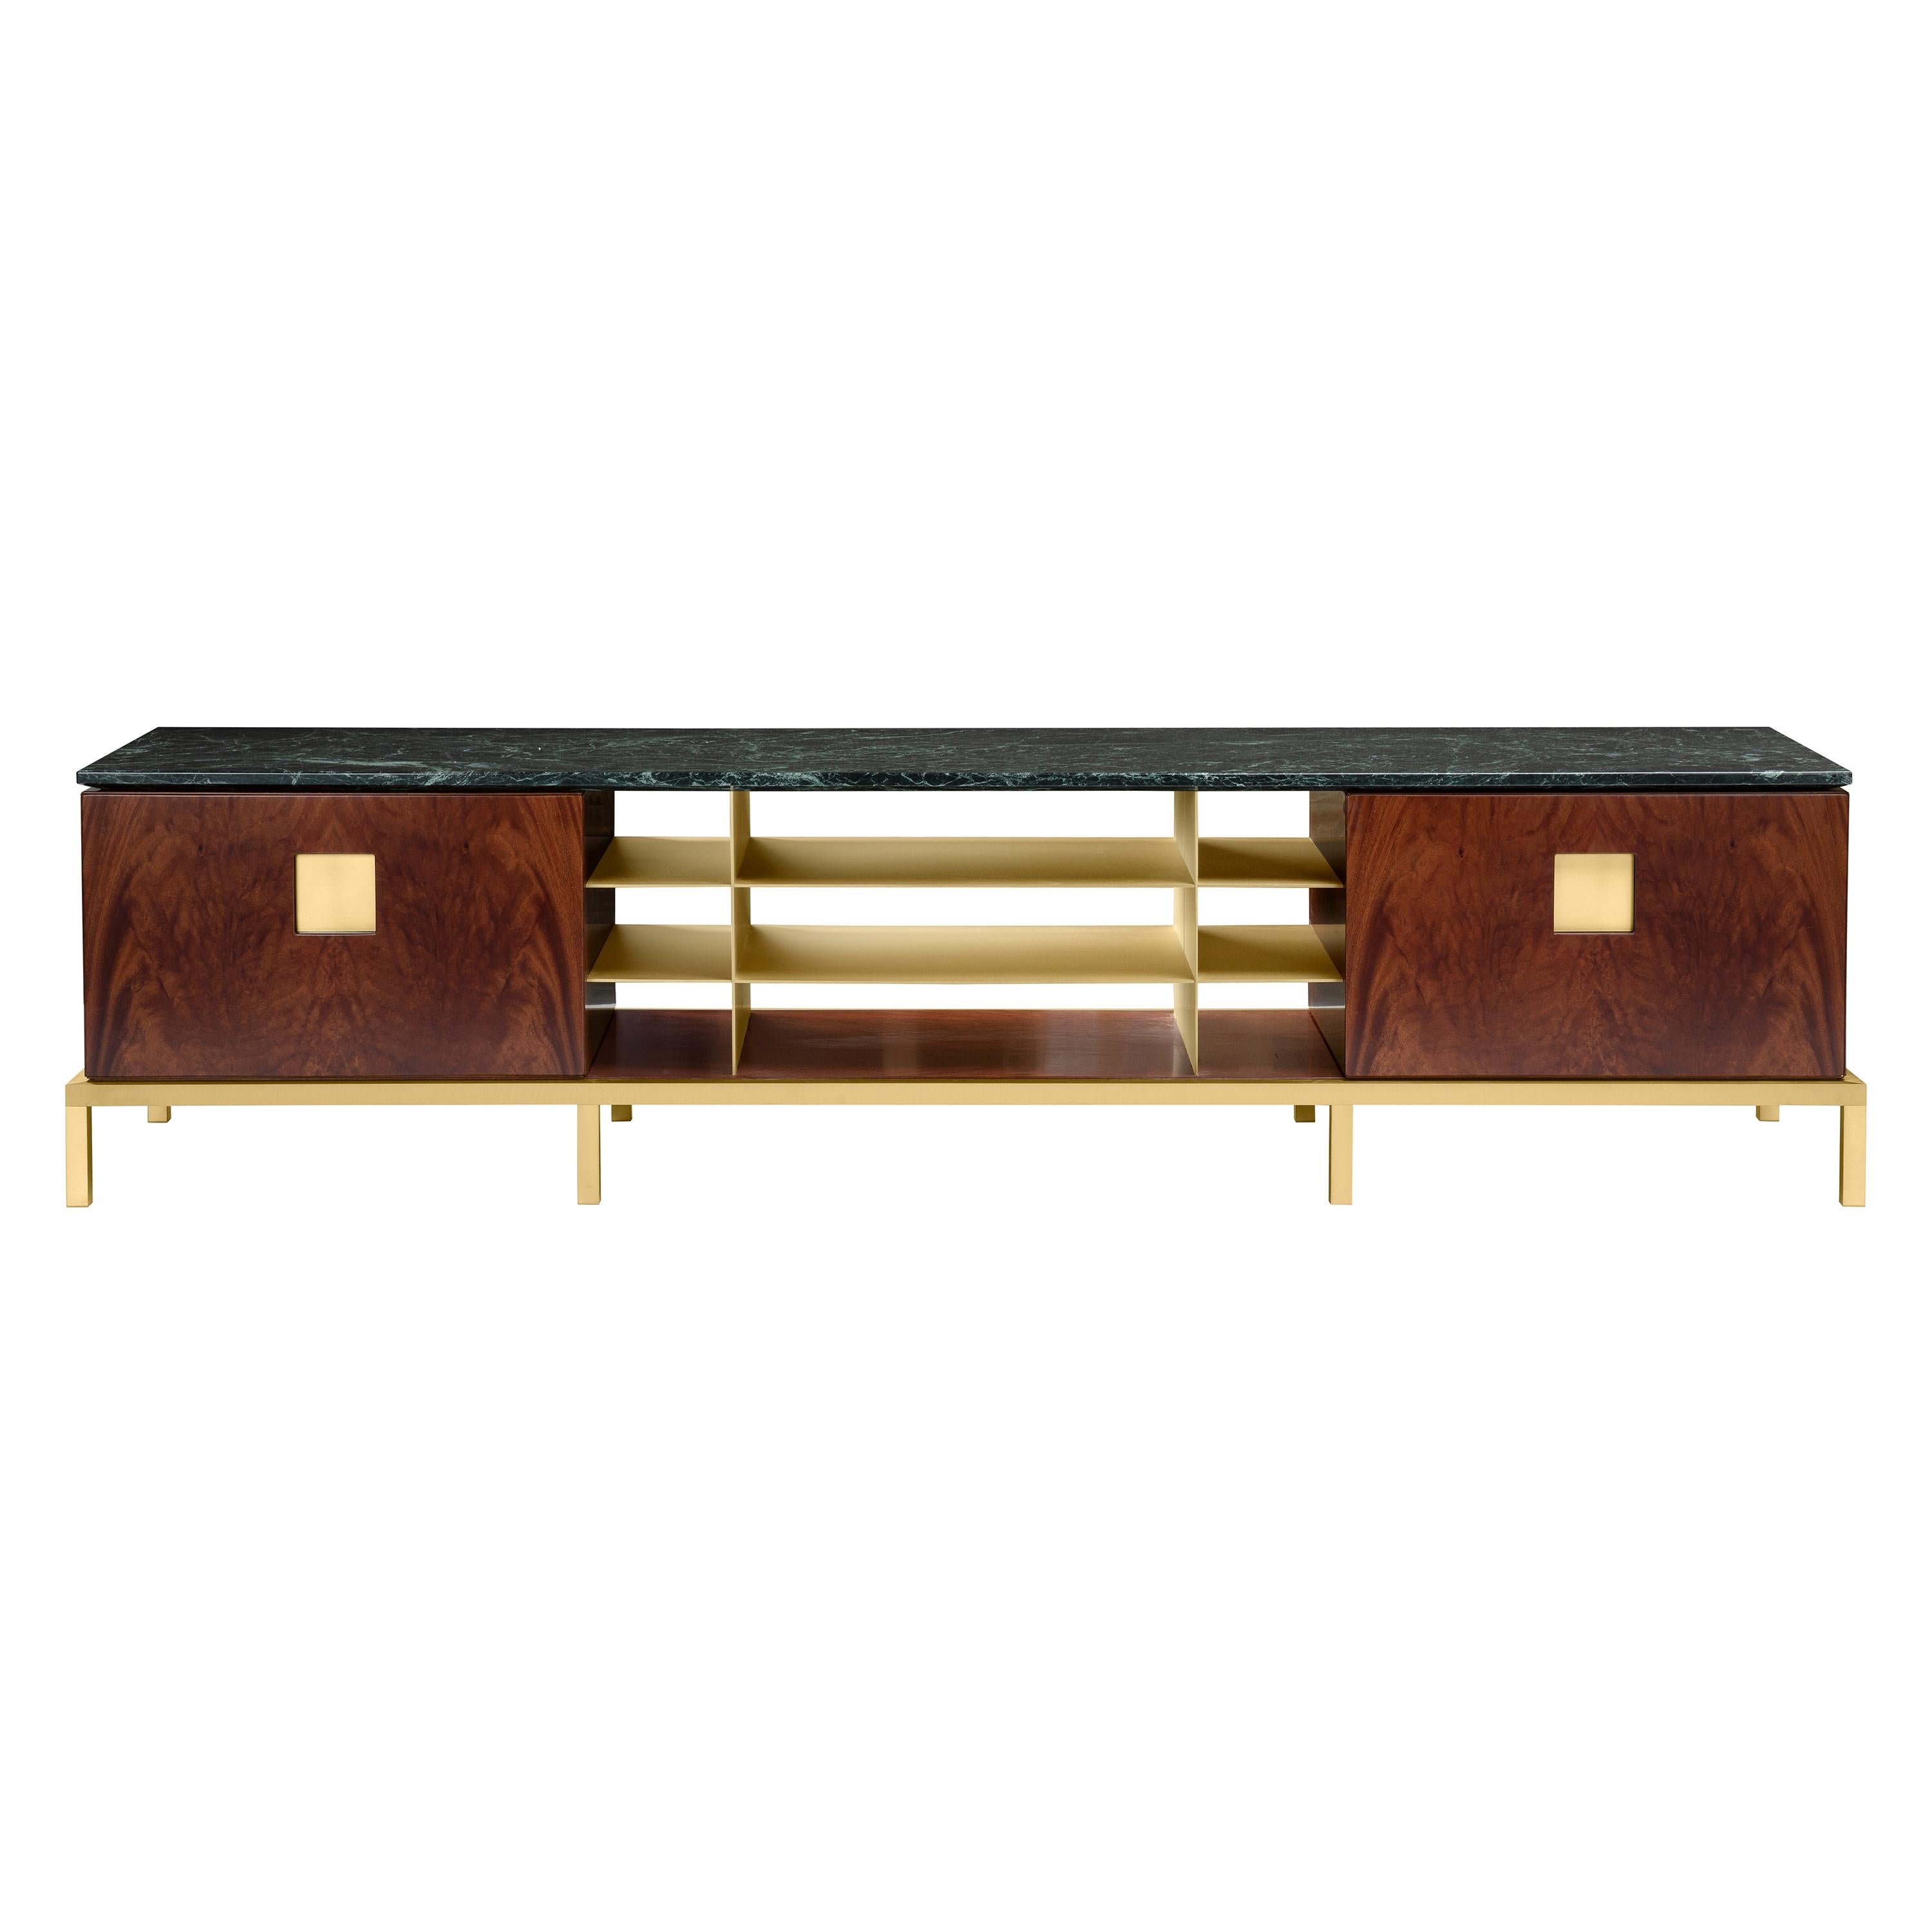 Zuan Living Cabinet in Satin Brass Legs with Mahogany Wood by Paolo Rizzatto For Sale